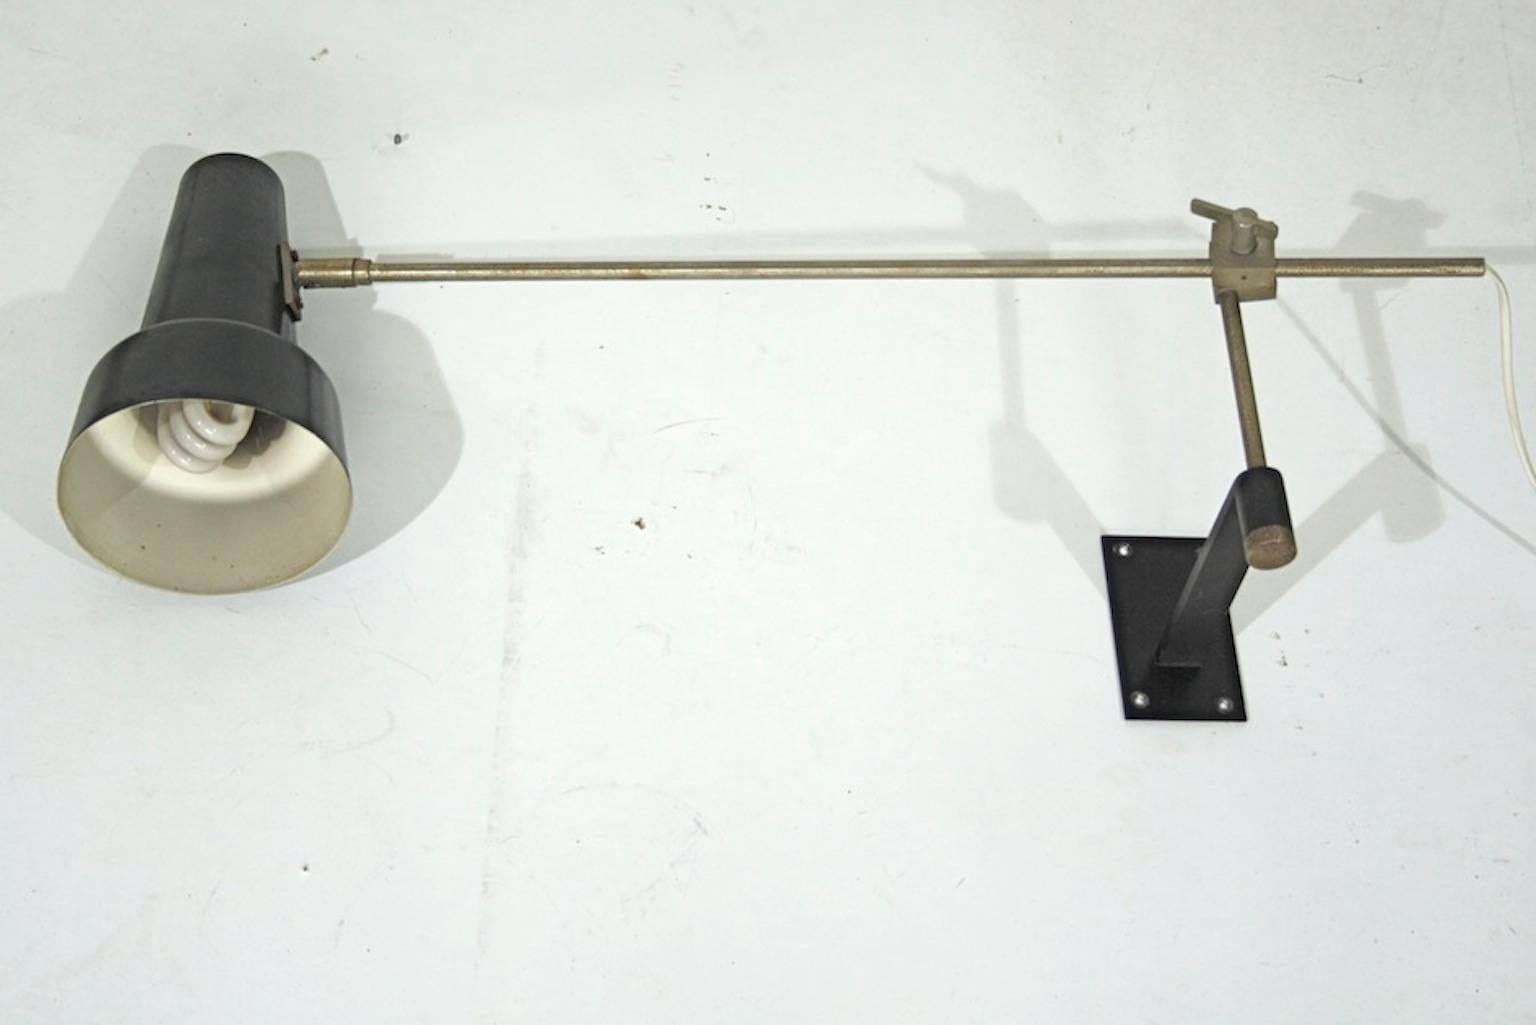 Large black metal wall light, some rust to the metal arm.

Measures: Length 80 cm
Height 40 cm, (lampshade: 25 cm)
Diameter 14 cm.